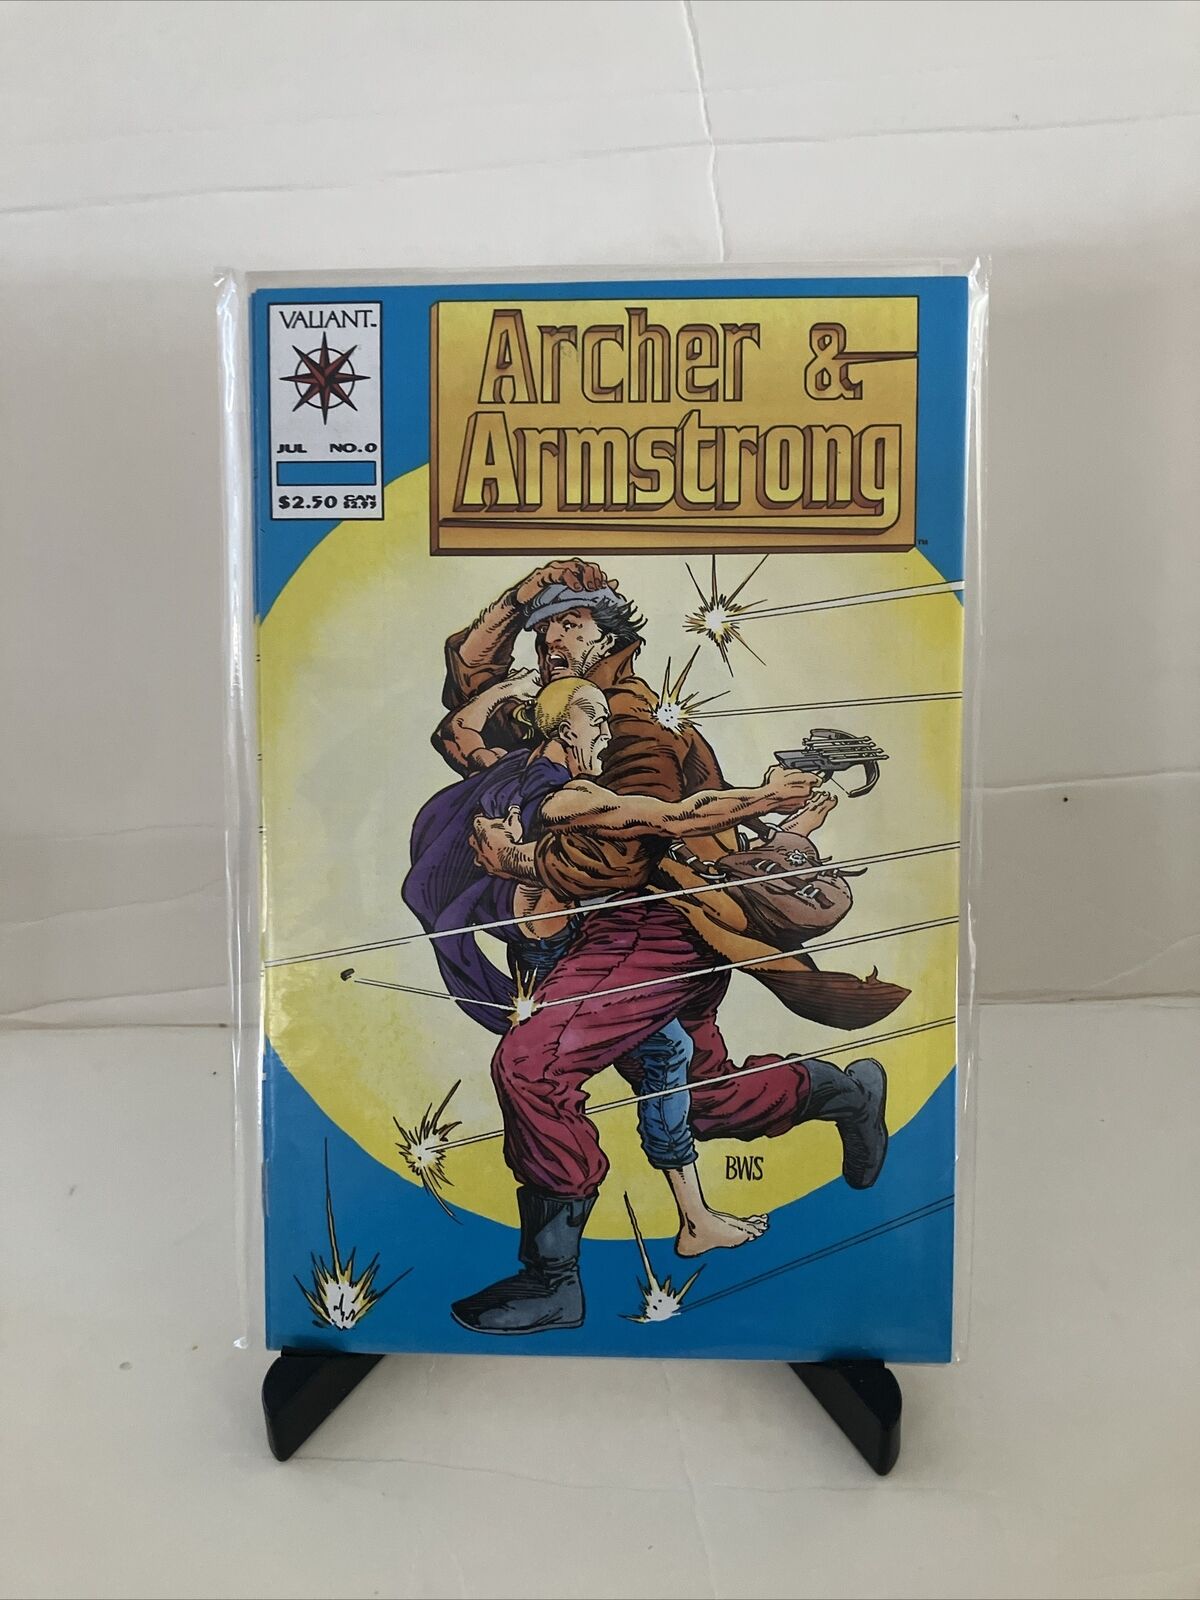 Archer and Armstrong #0 - Valiant Comics 1992 -